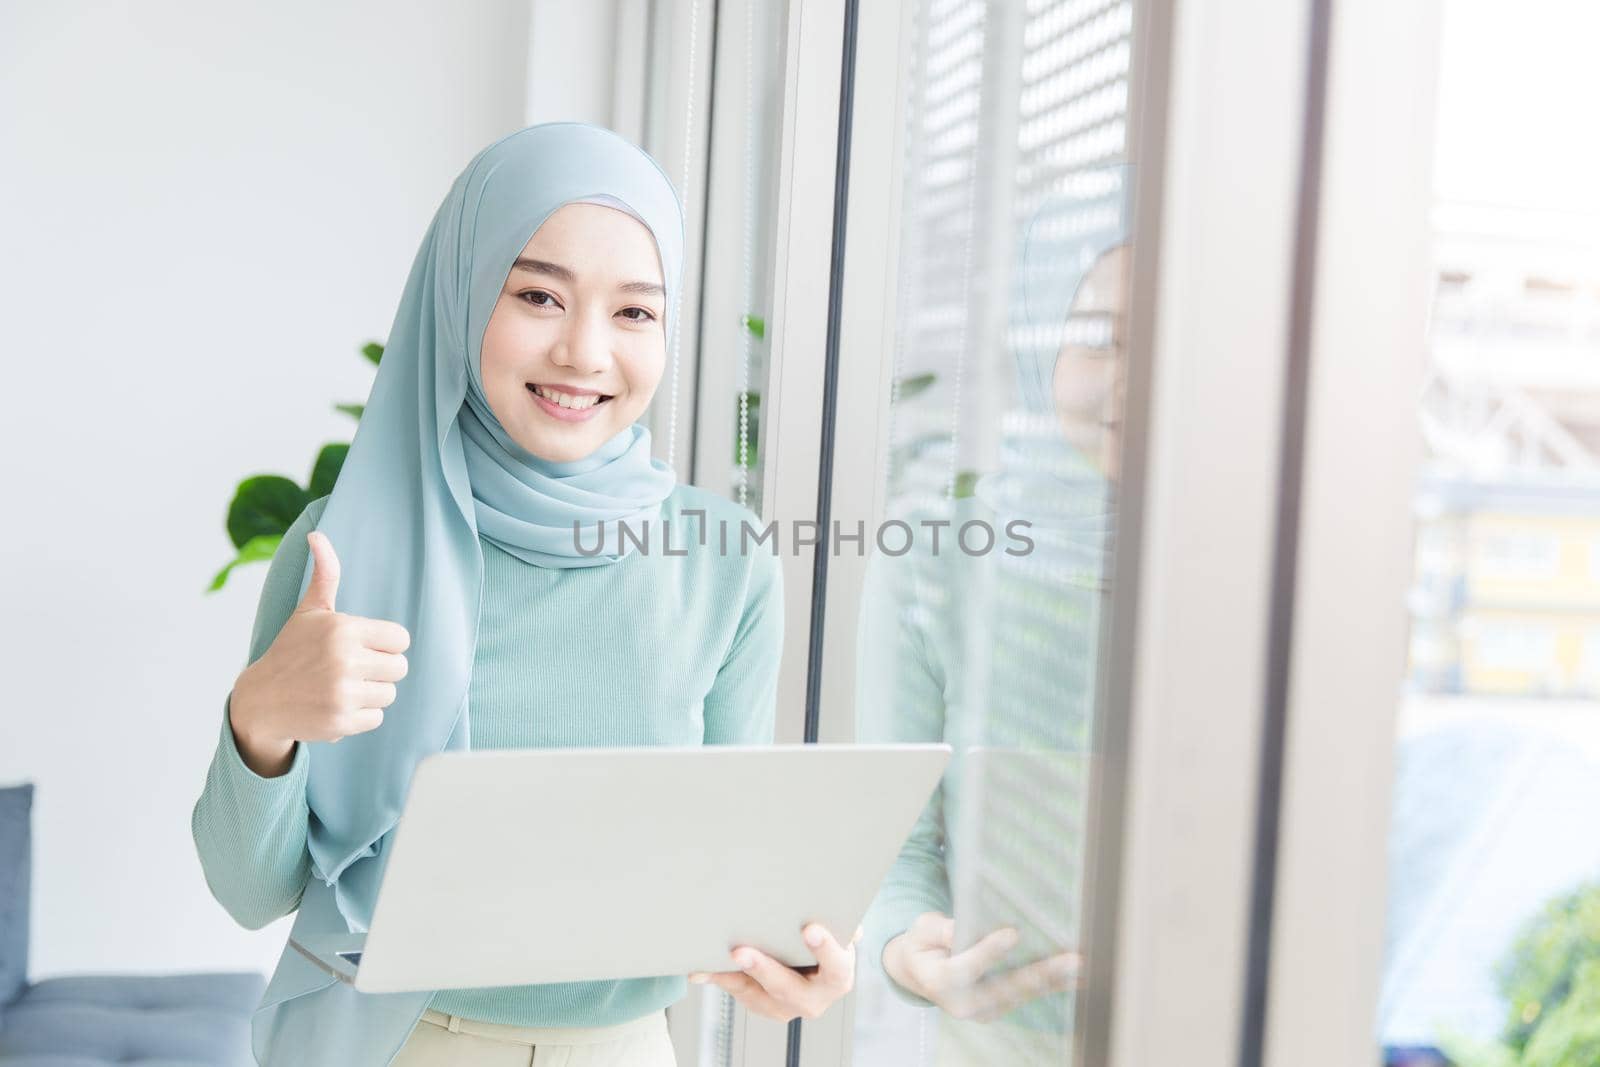 Asian Muslim Islamic woman with hijab happy enjoy working in office with laptop computer.